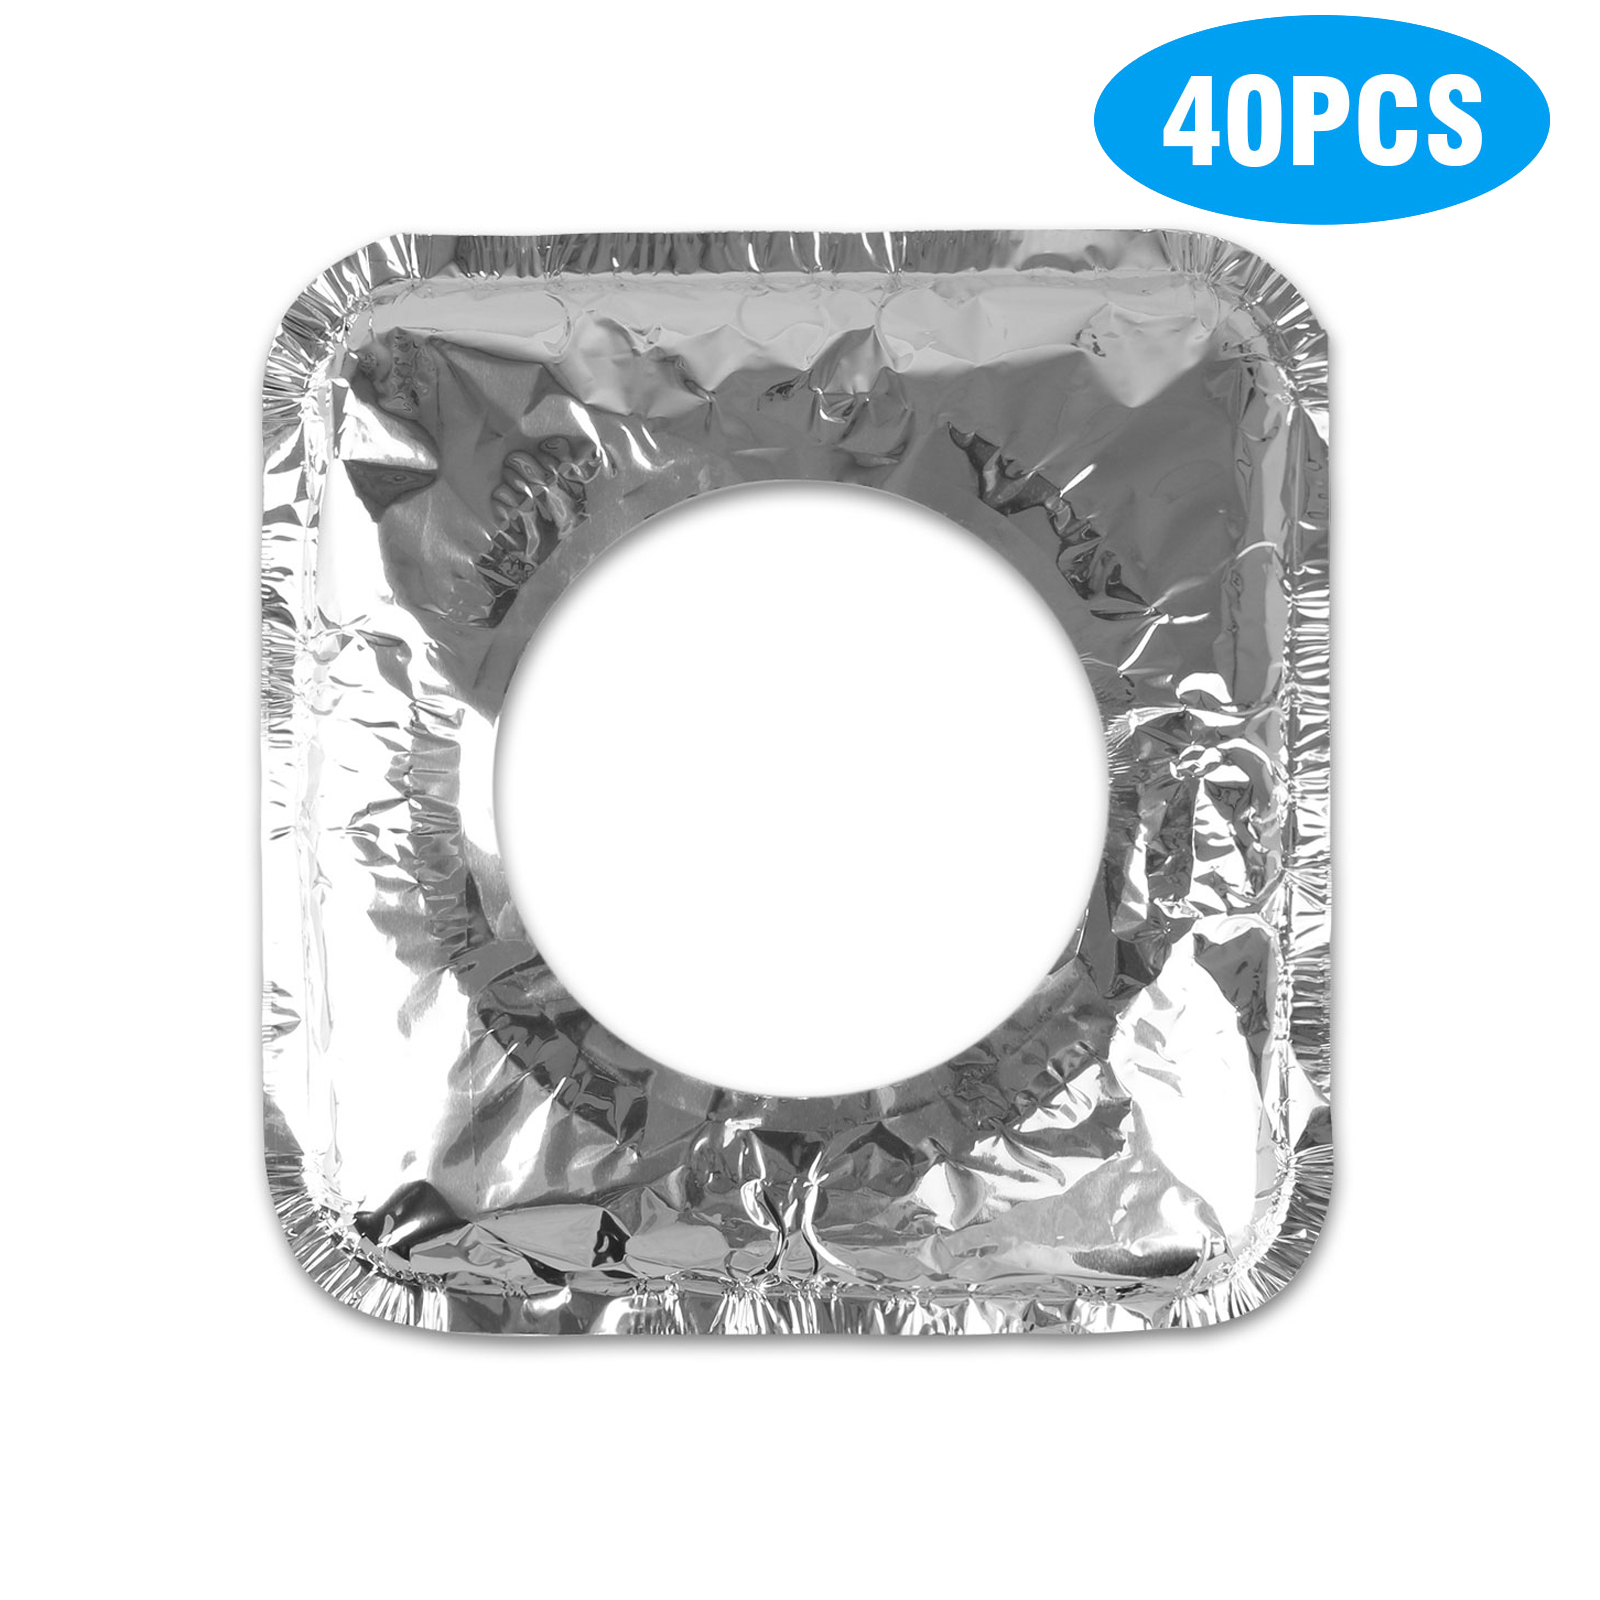 Aluminum Foil Gas Stove Top Protector Burner Liner Pad Cover Kitchen Cleaning